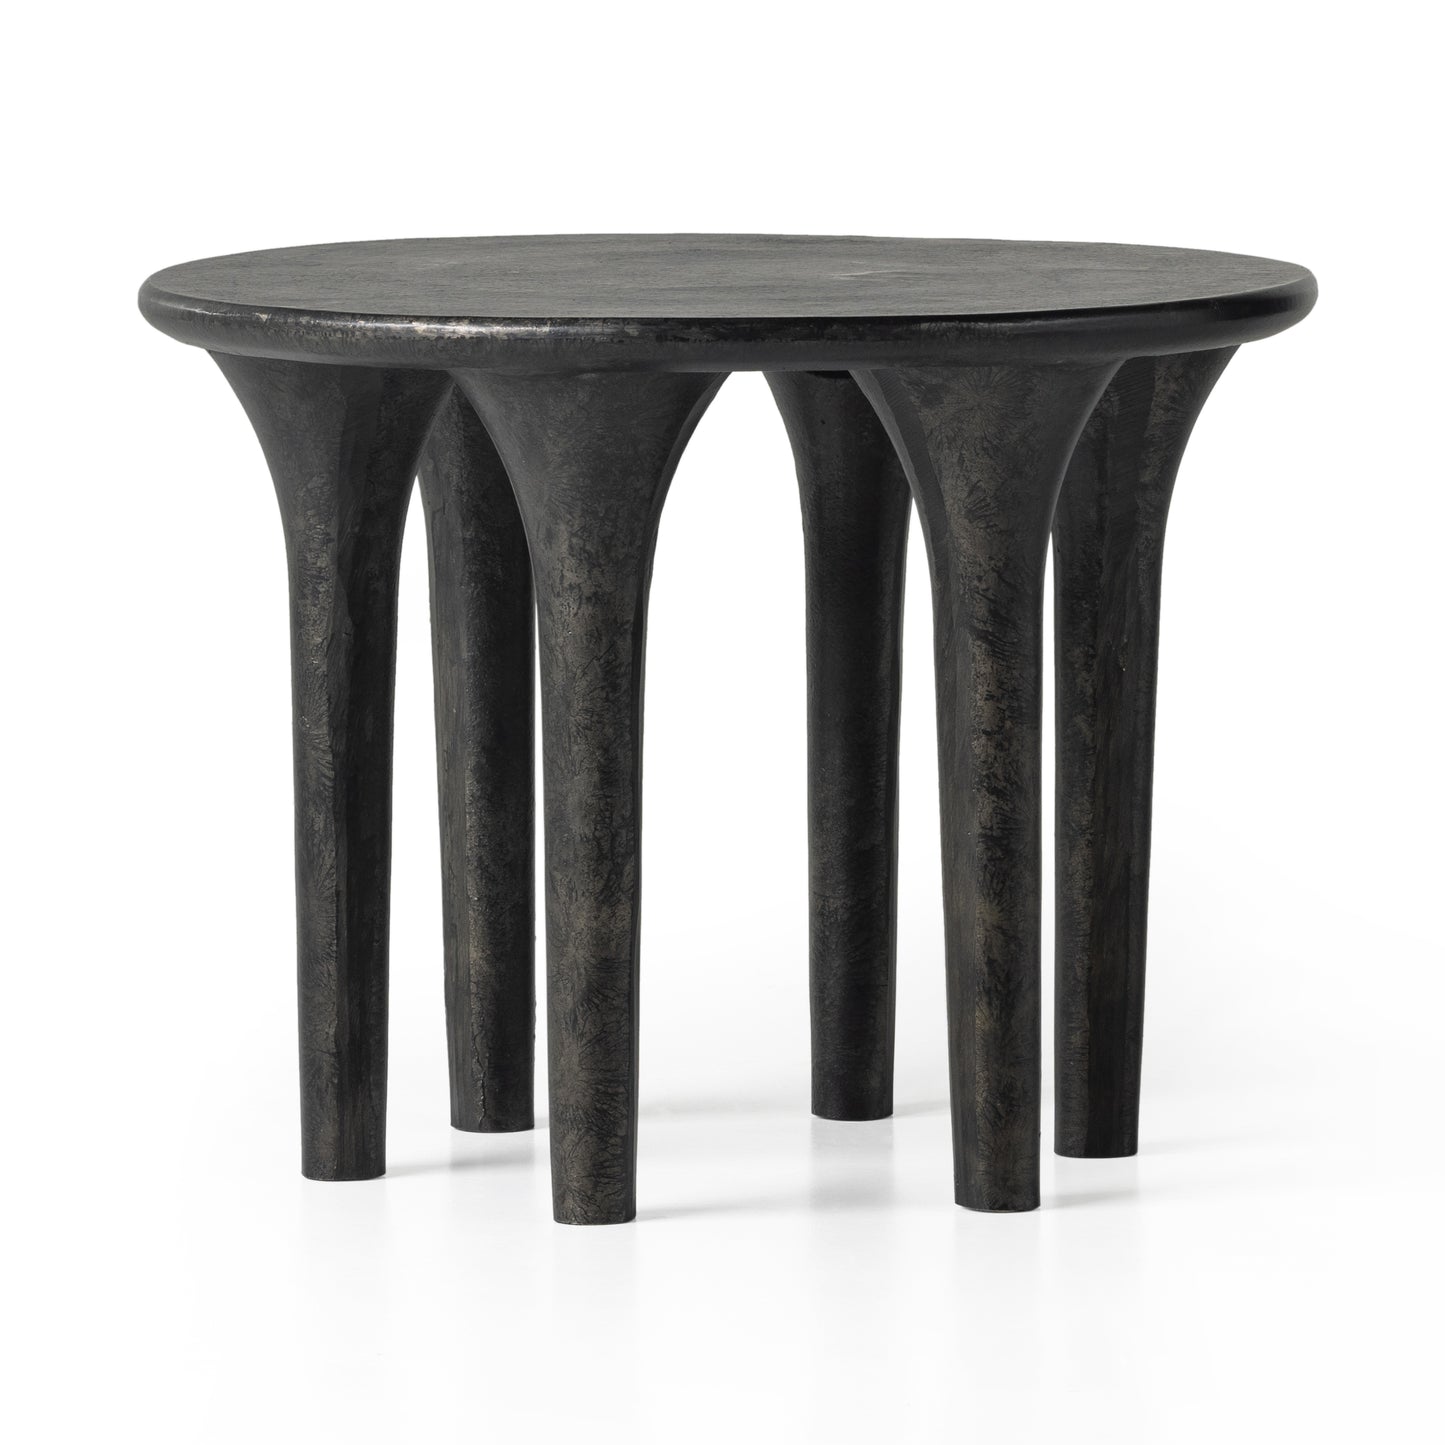 Keldon Dining Table Raw BlackEnd Table Four Hands  Raw Black   Four Hands, Mid Century Modern Furniture, Old Bones Furniture Company, Old Bones Co, Modern Mid Century, Designer Furniture, https://www.oldbonesco.com/